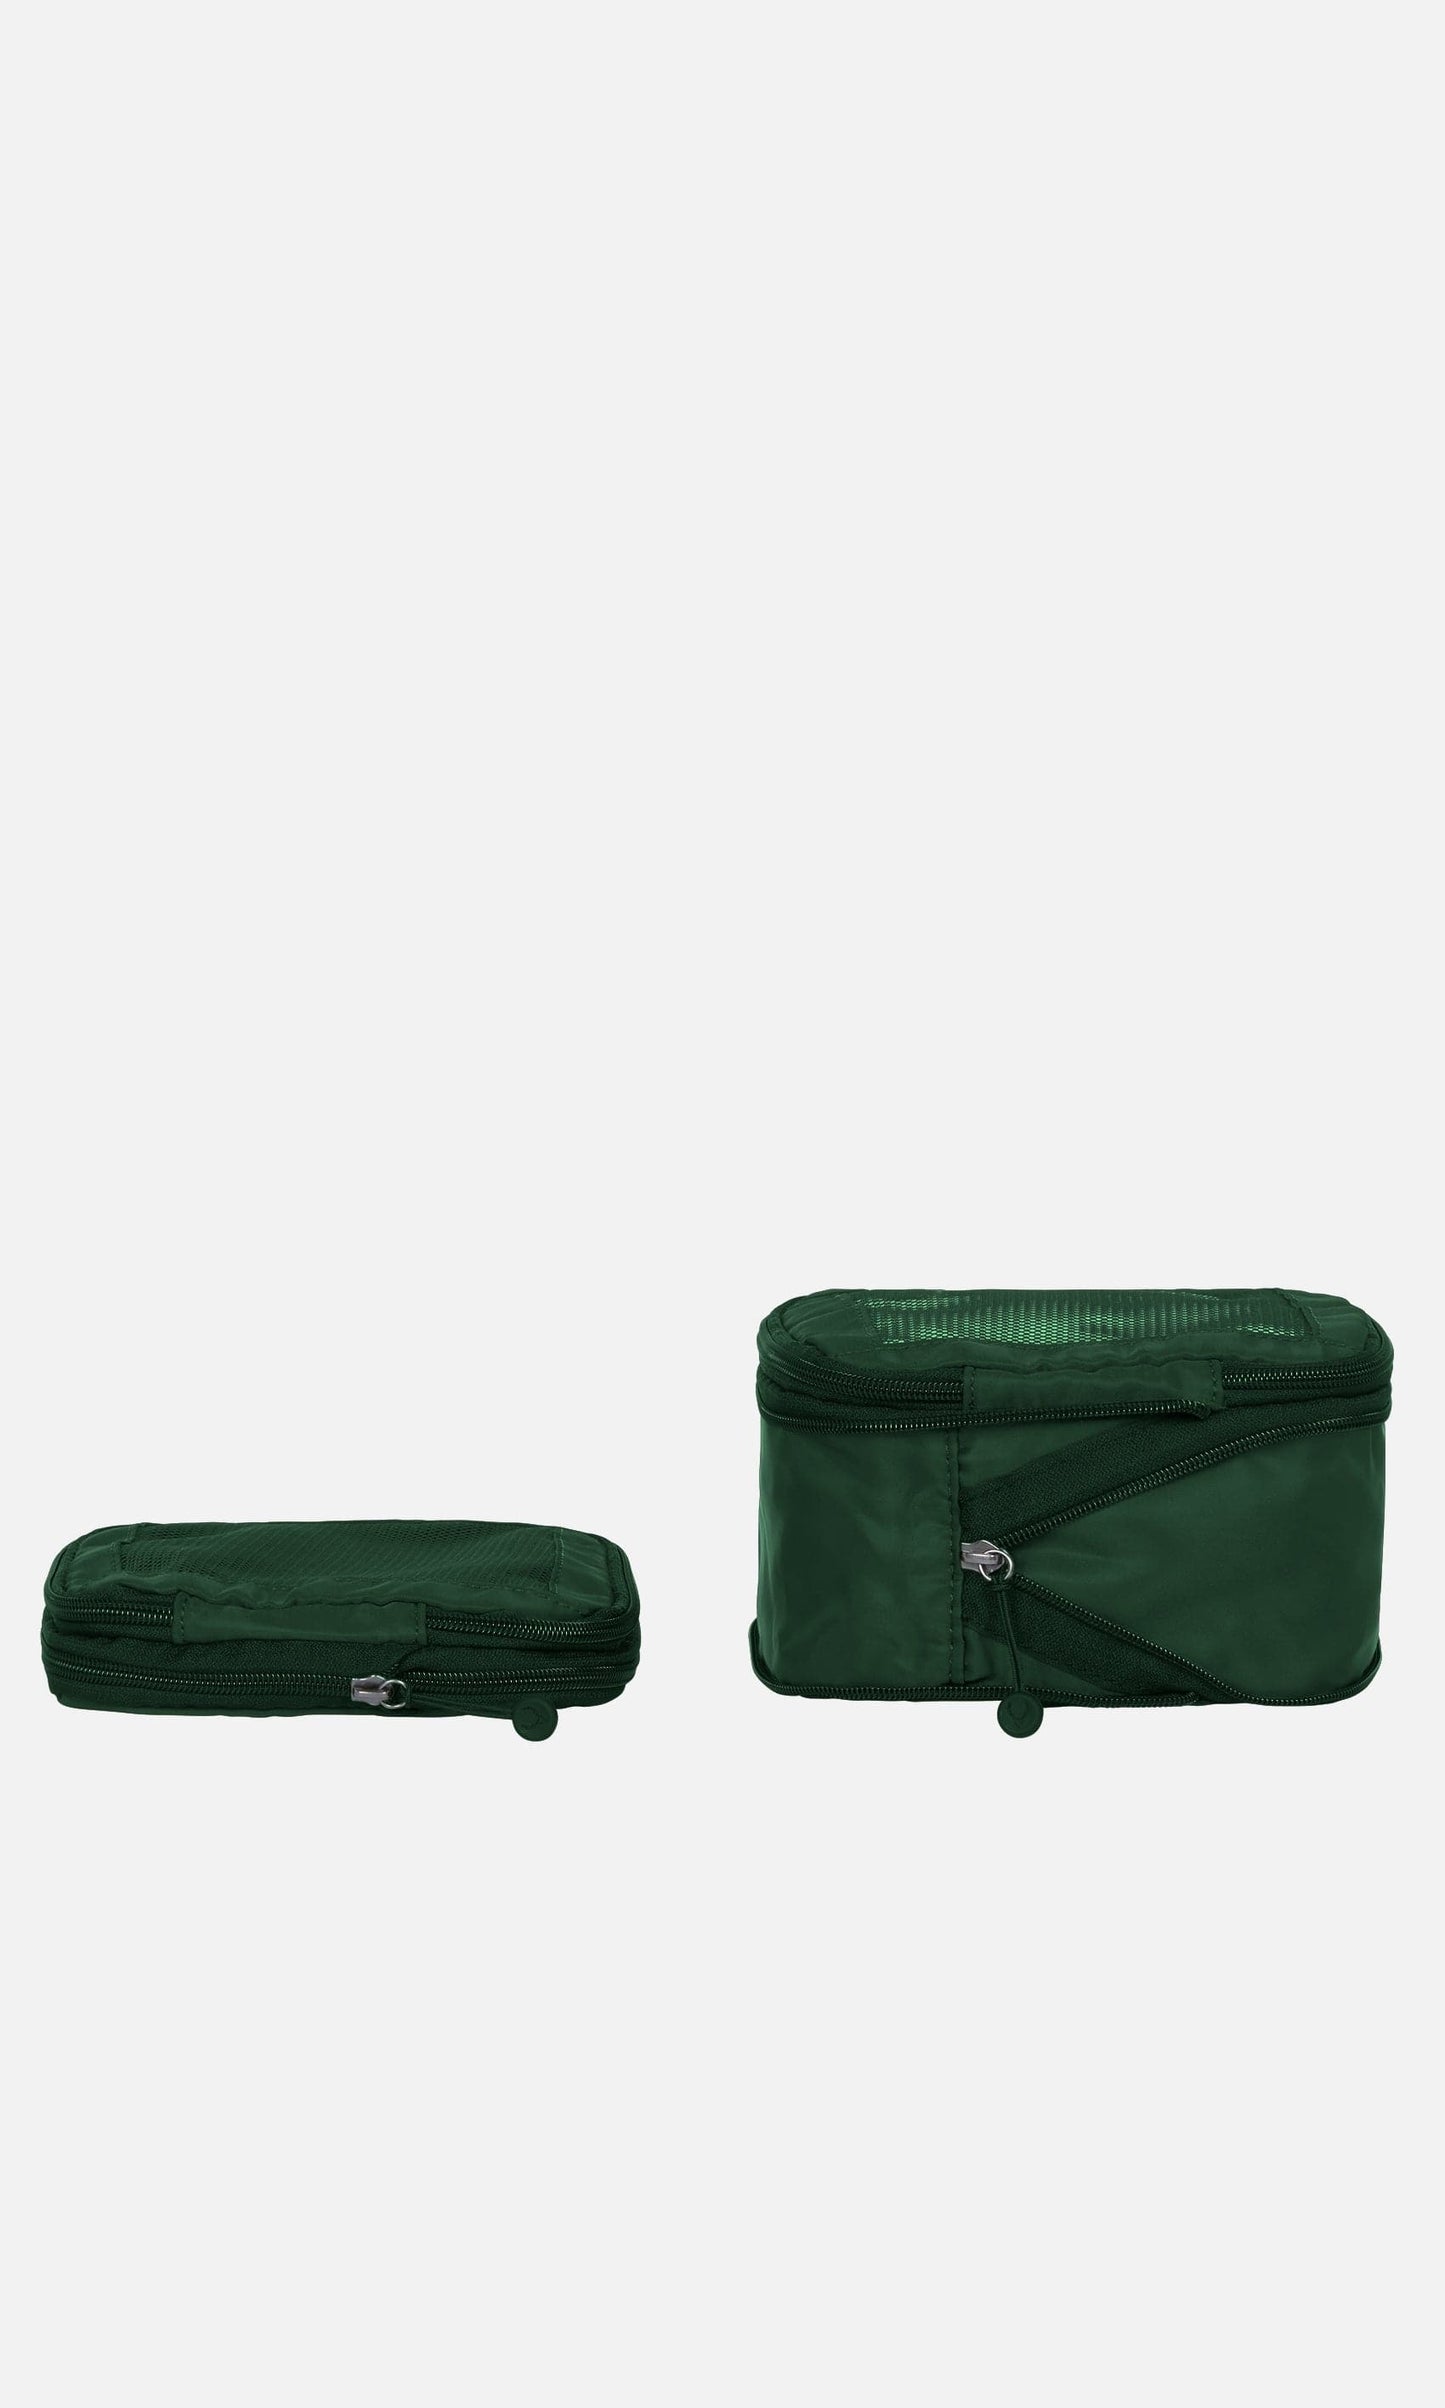 Antler Luggage -  Chelsea 4 packing cubes in woodland green - Accessories Chelsea 4 Packing Cubes Green | Travel Accessories | Antler UK